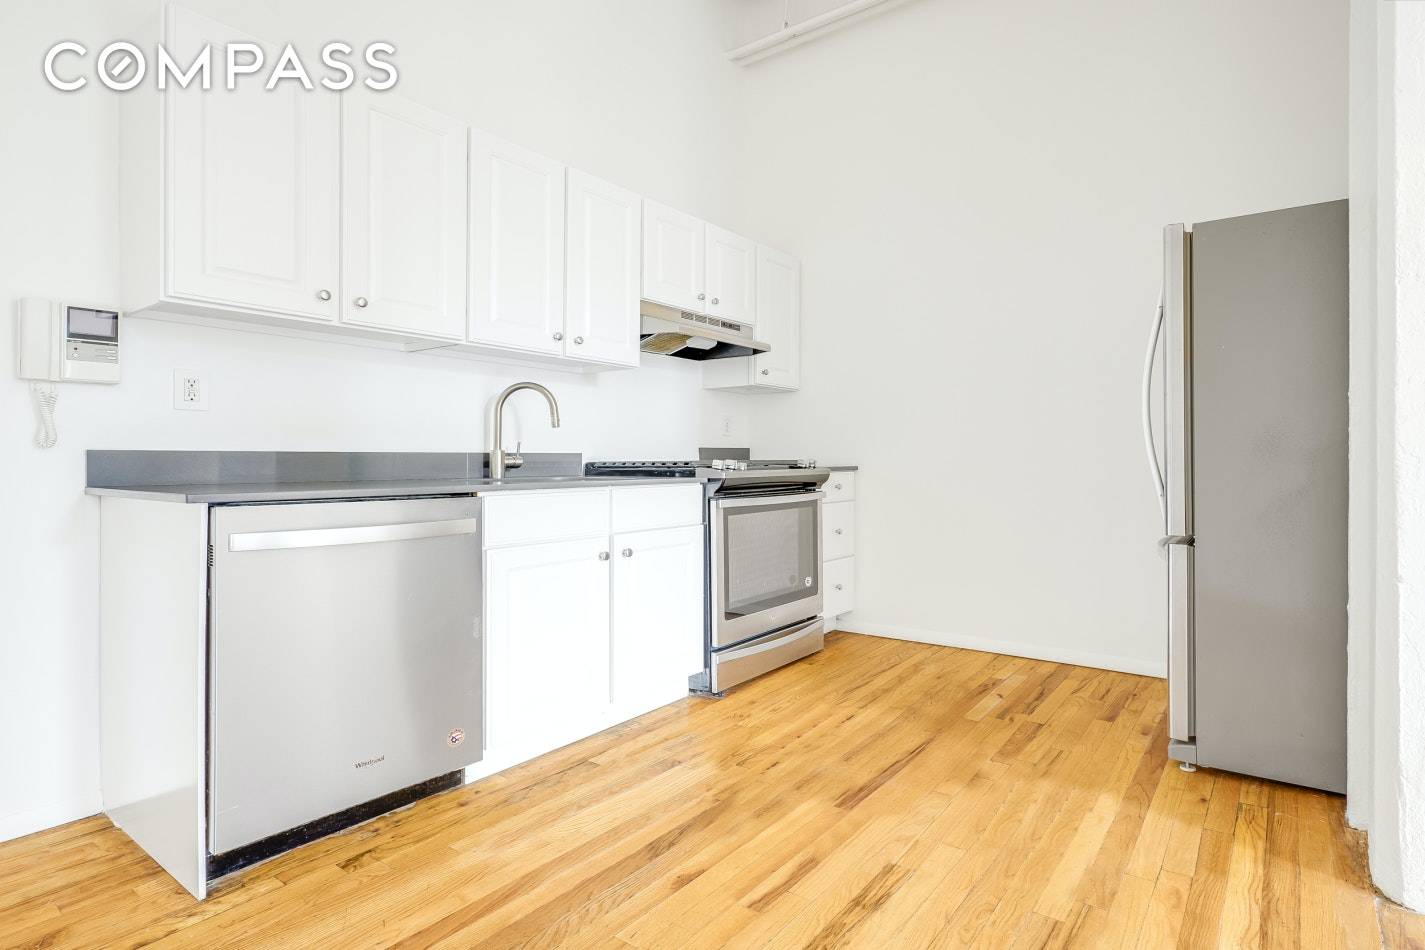 20ft ceilings greet you as you enter into this 863 square foot 2 bed 1 bath residence.